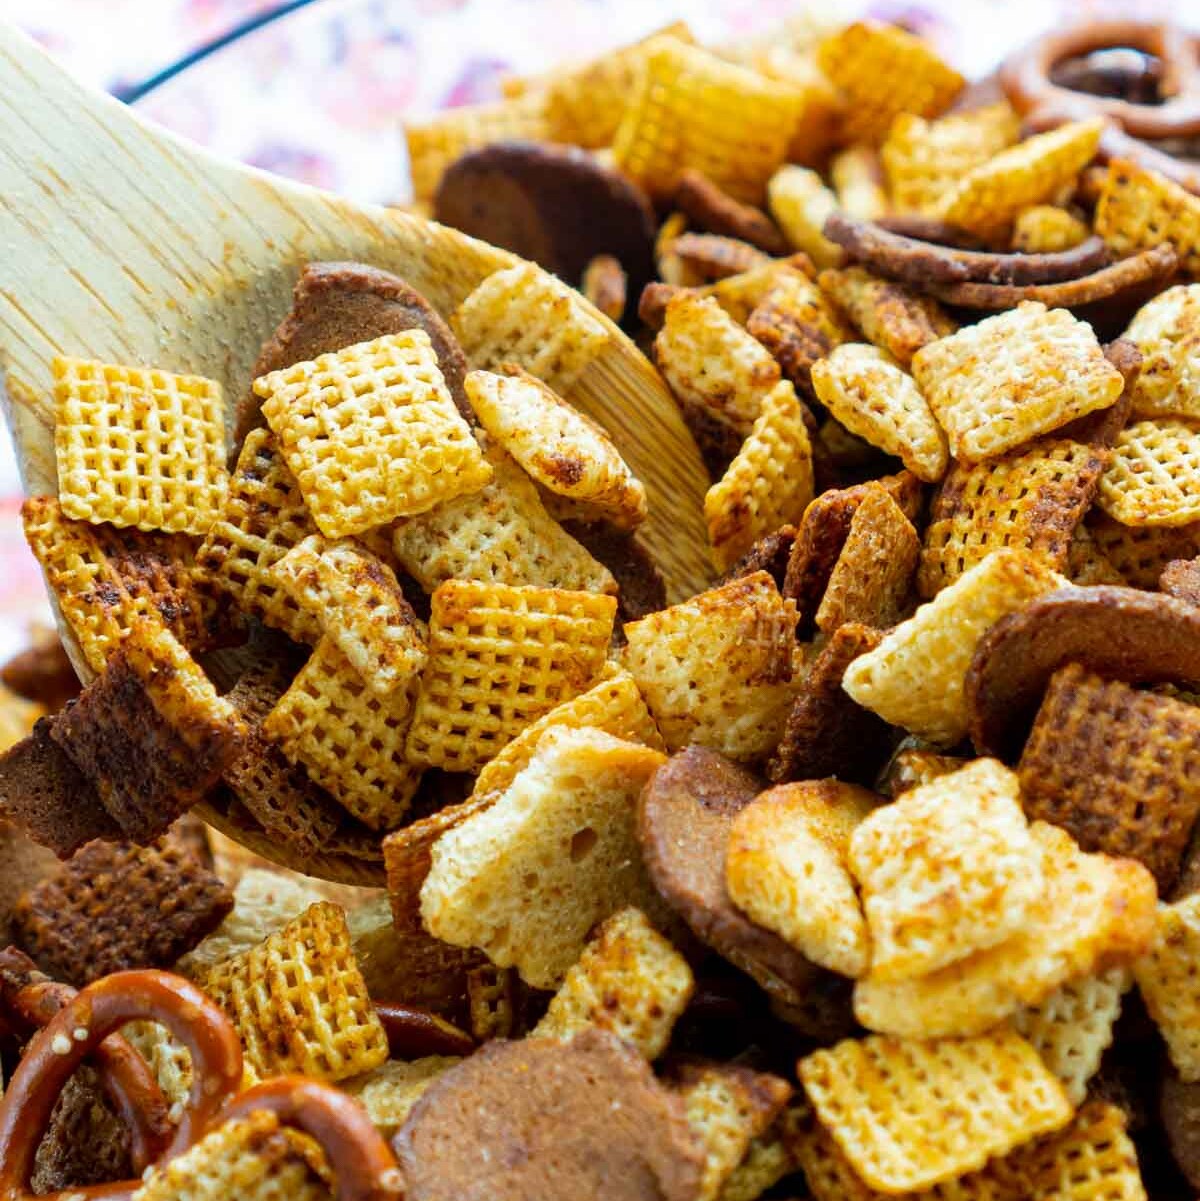 https://www.playpartyplan.com/wp-content/uploads/2020/09/homemade-chex-mix-9-of-10-1-e1599747455827.jpg